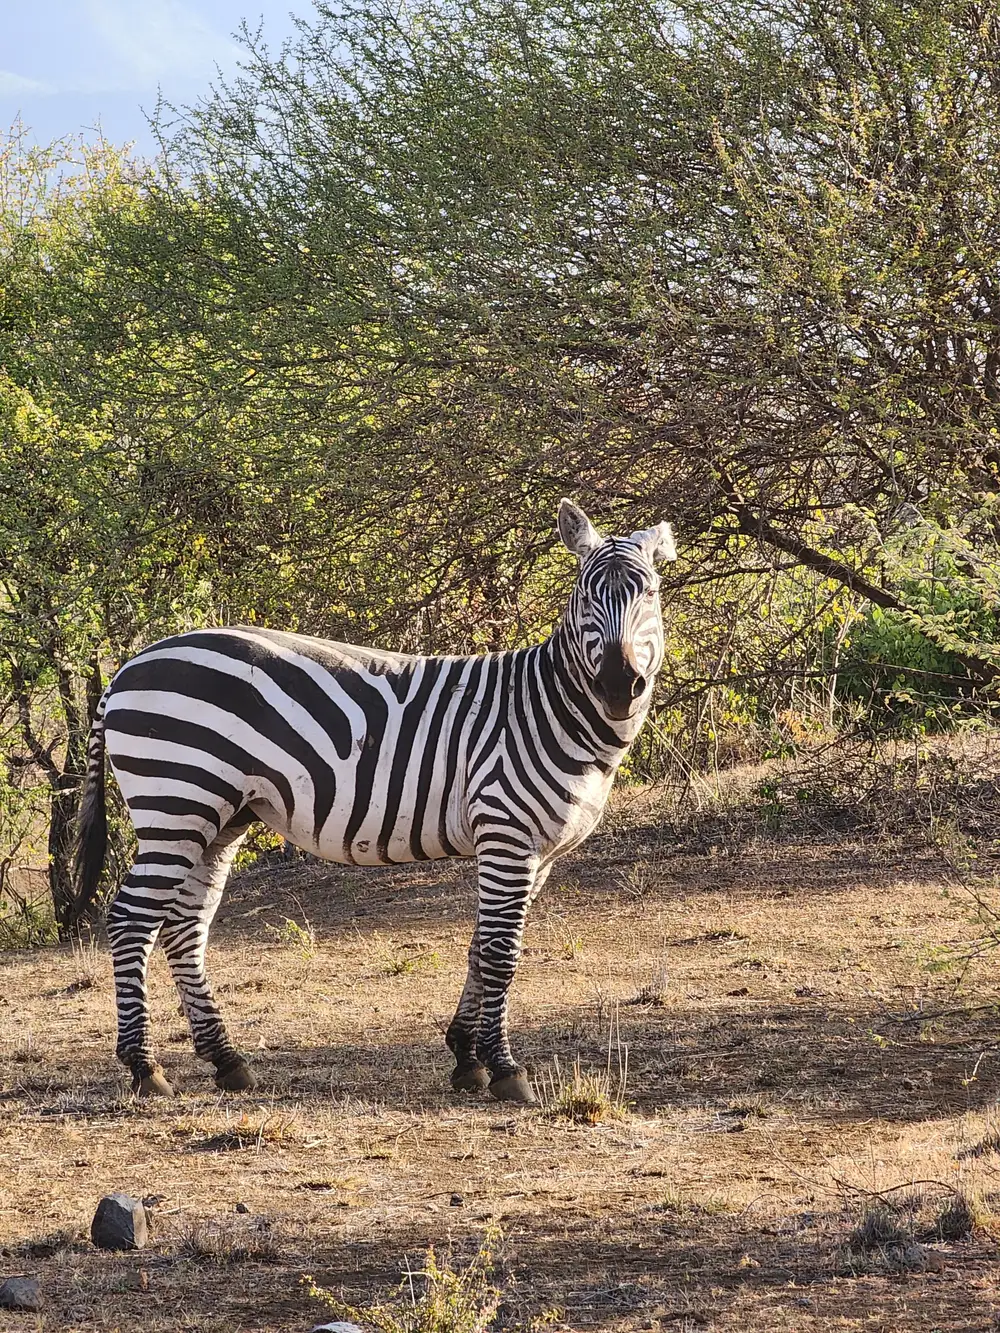 A Zebra in the forest